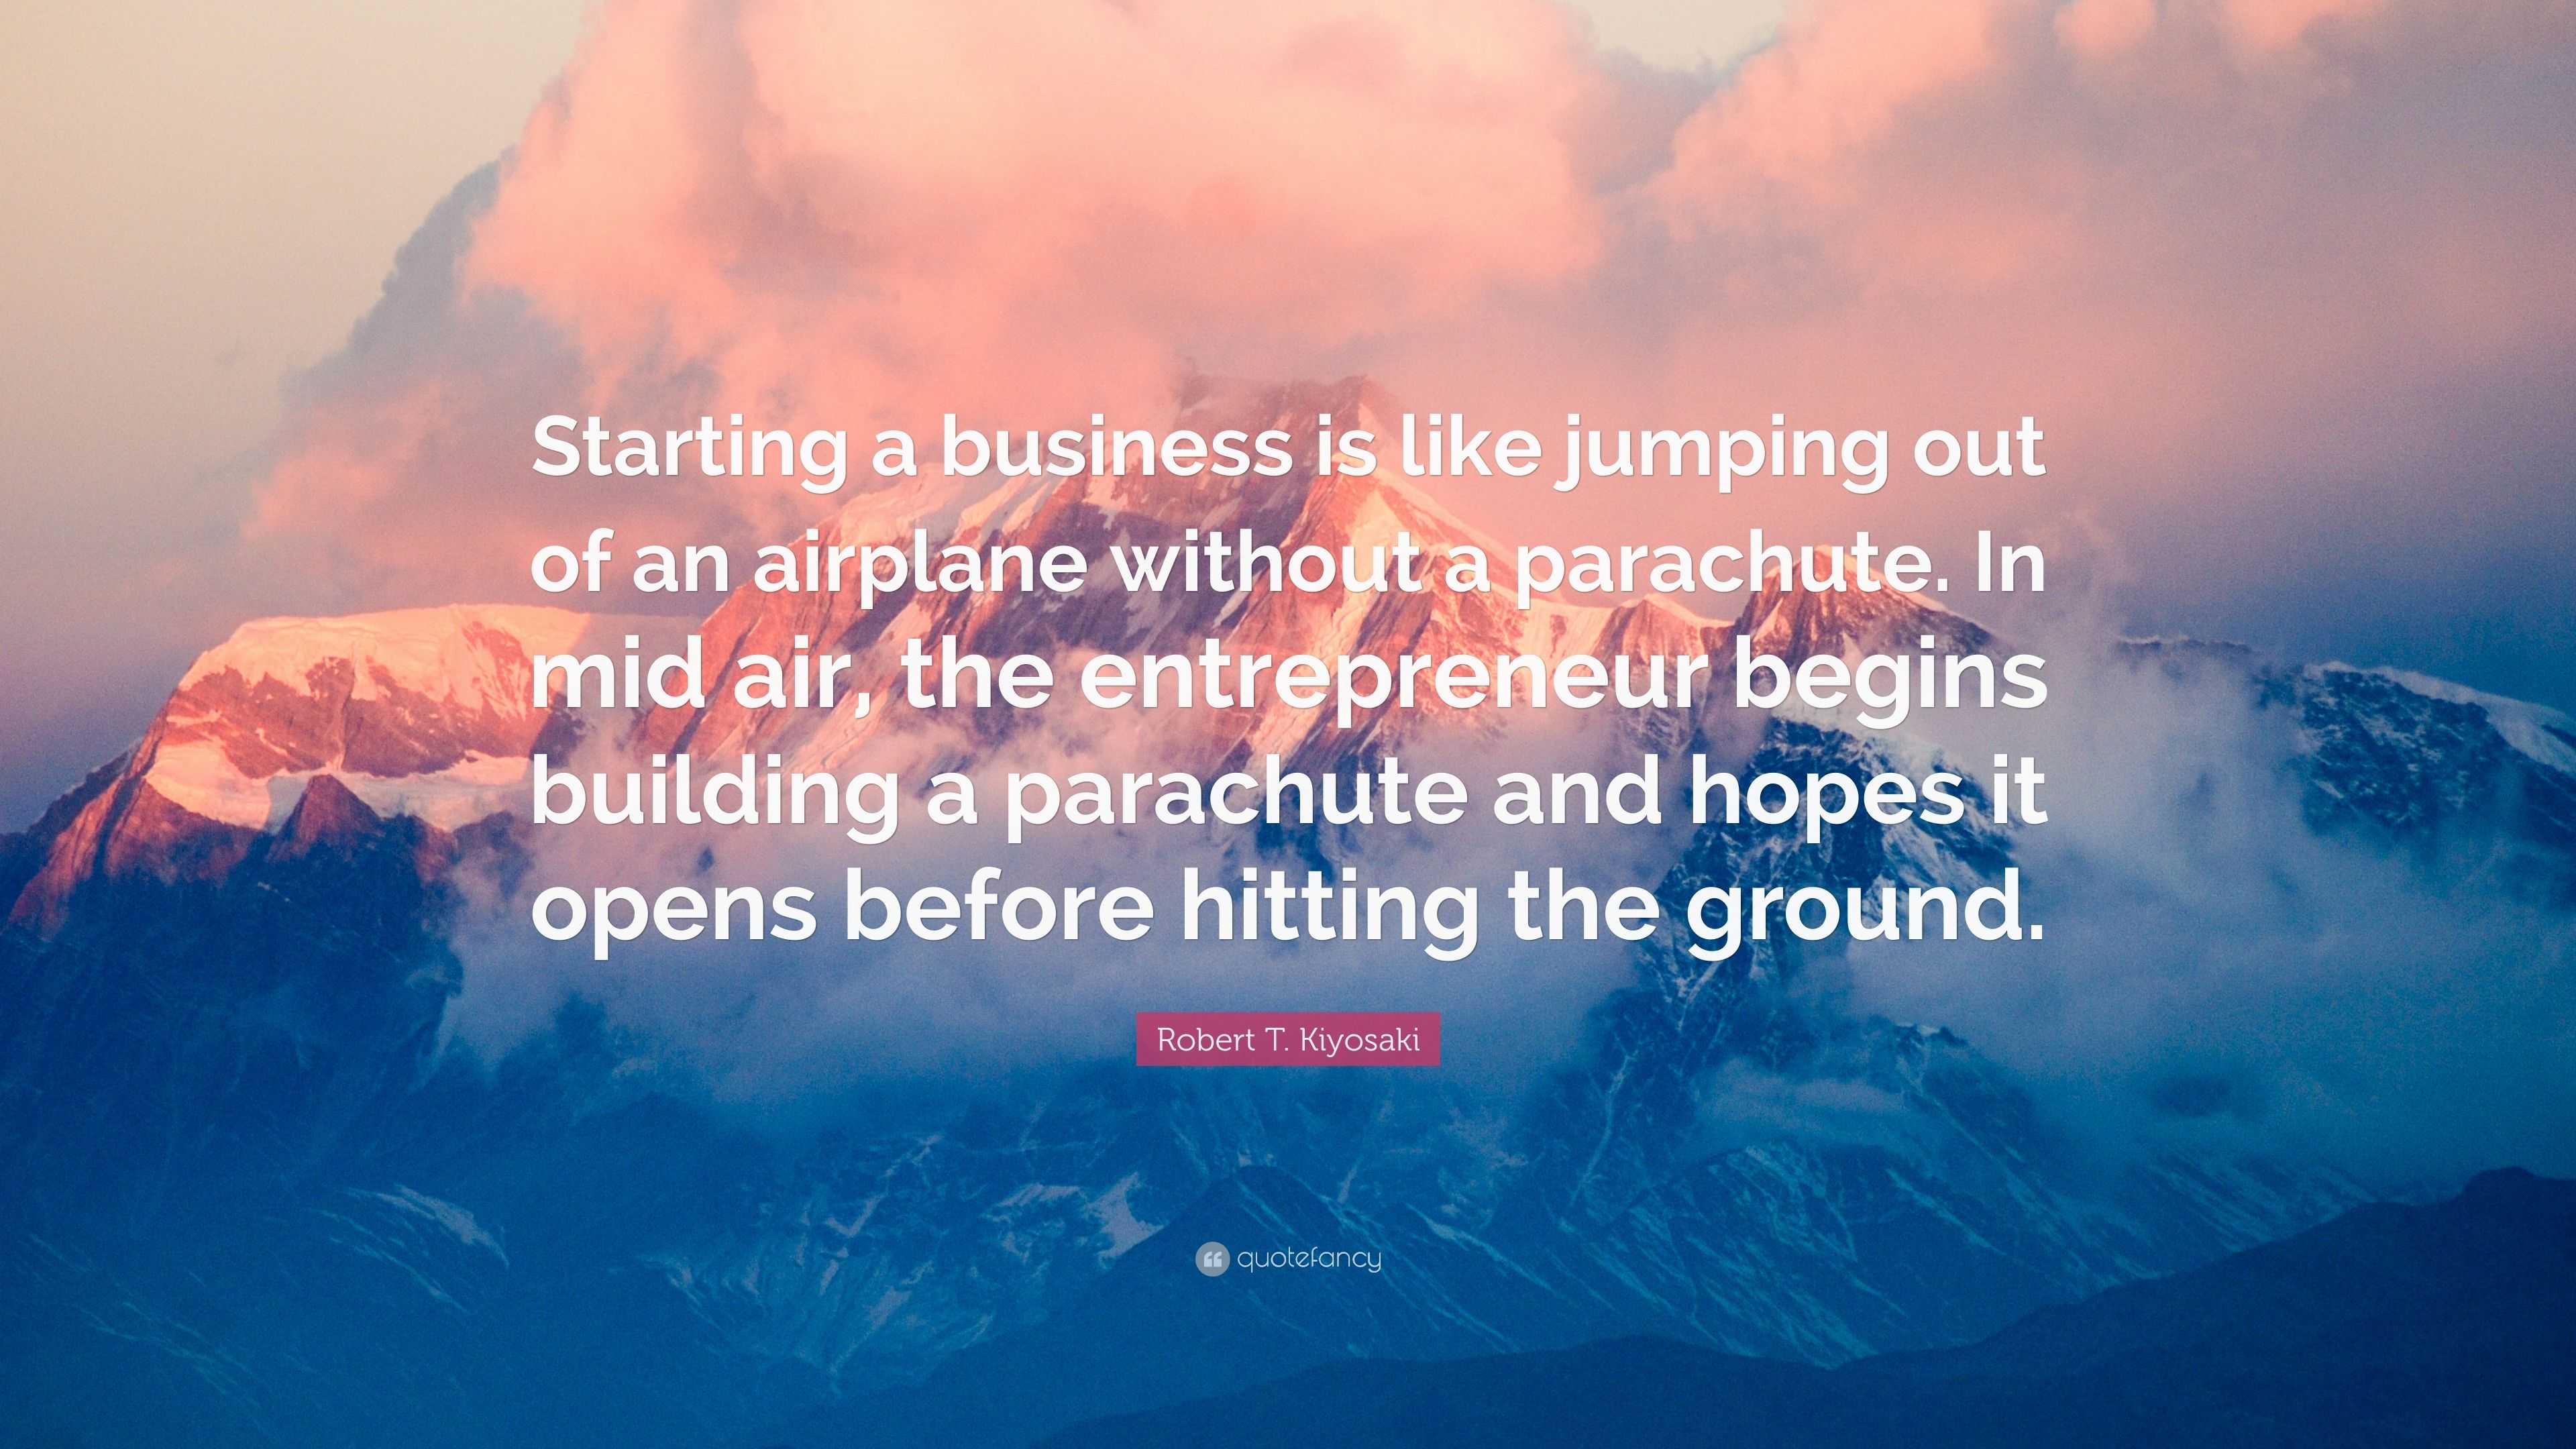 2210307 Robert T Kiyosaki Quote Starting a business is like jumping out of